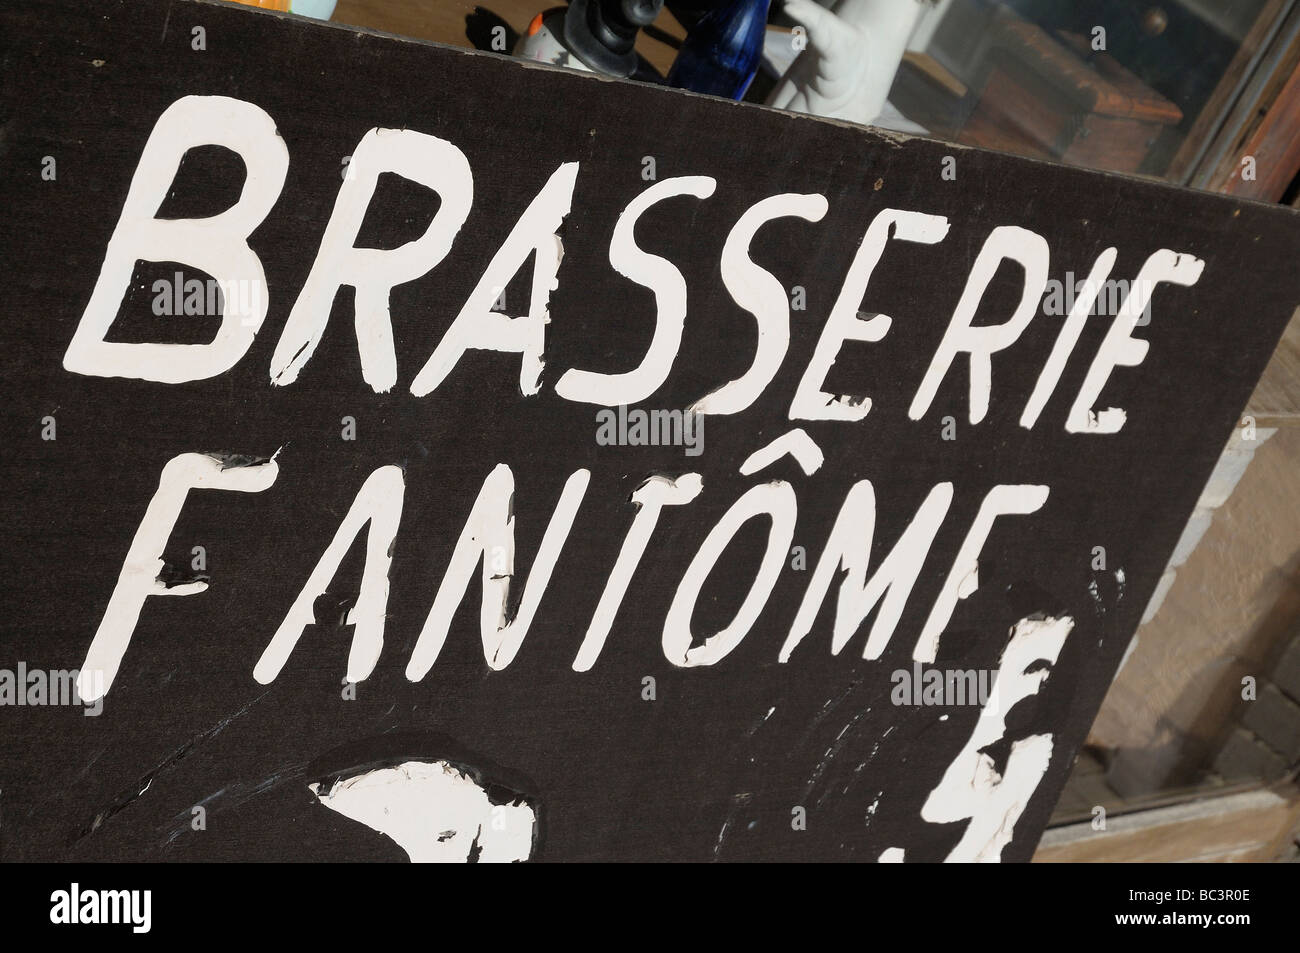 The sign of the Brasserie Fantome, a small brewery in the Ardennes region of Belgium. Stock Photo